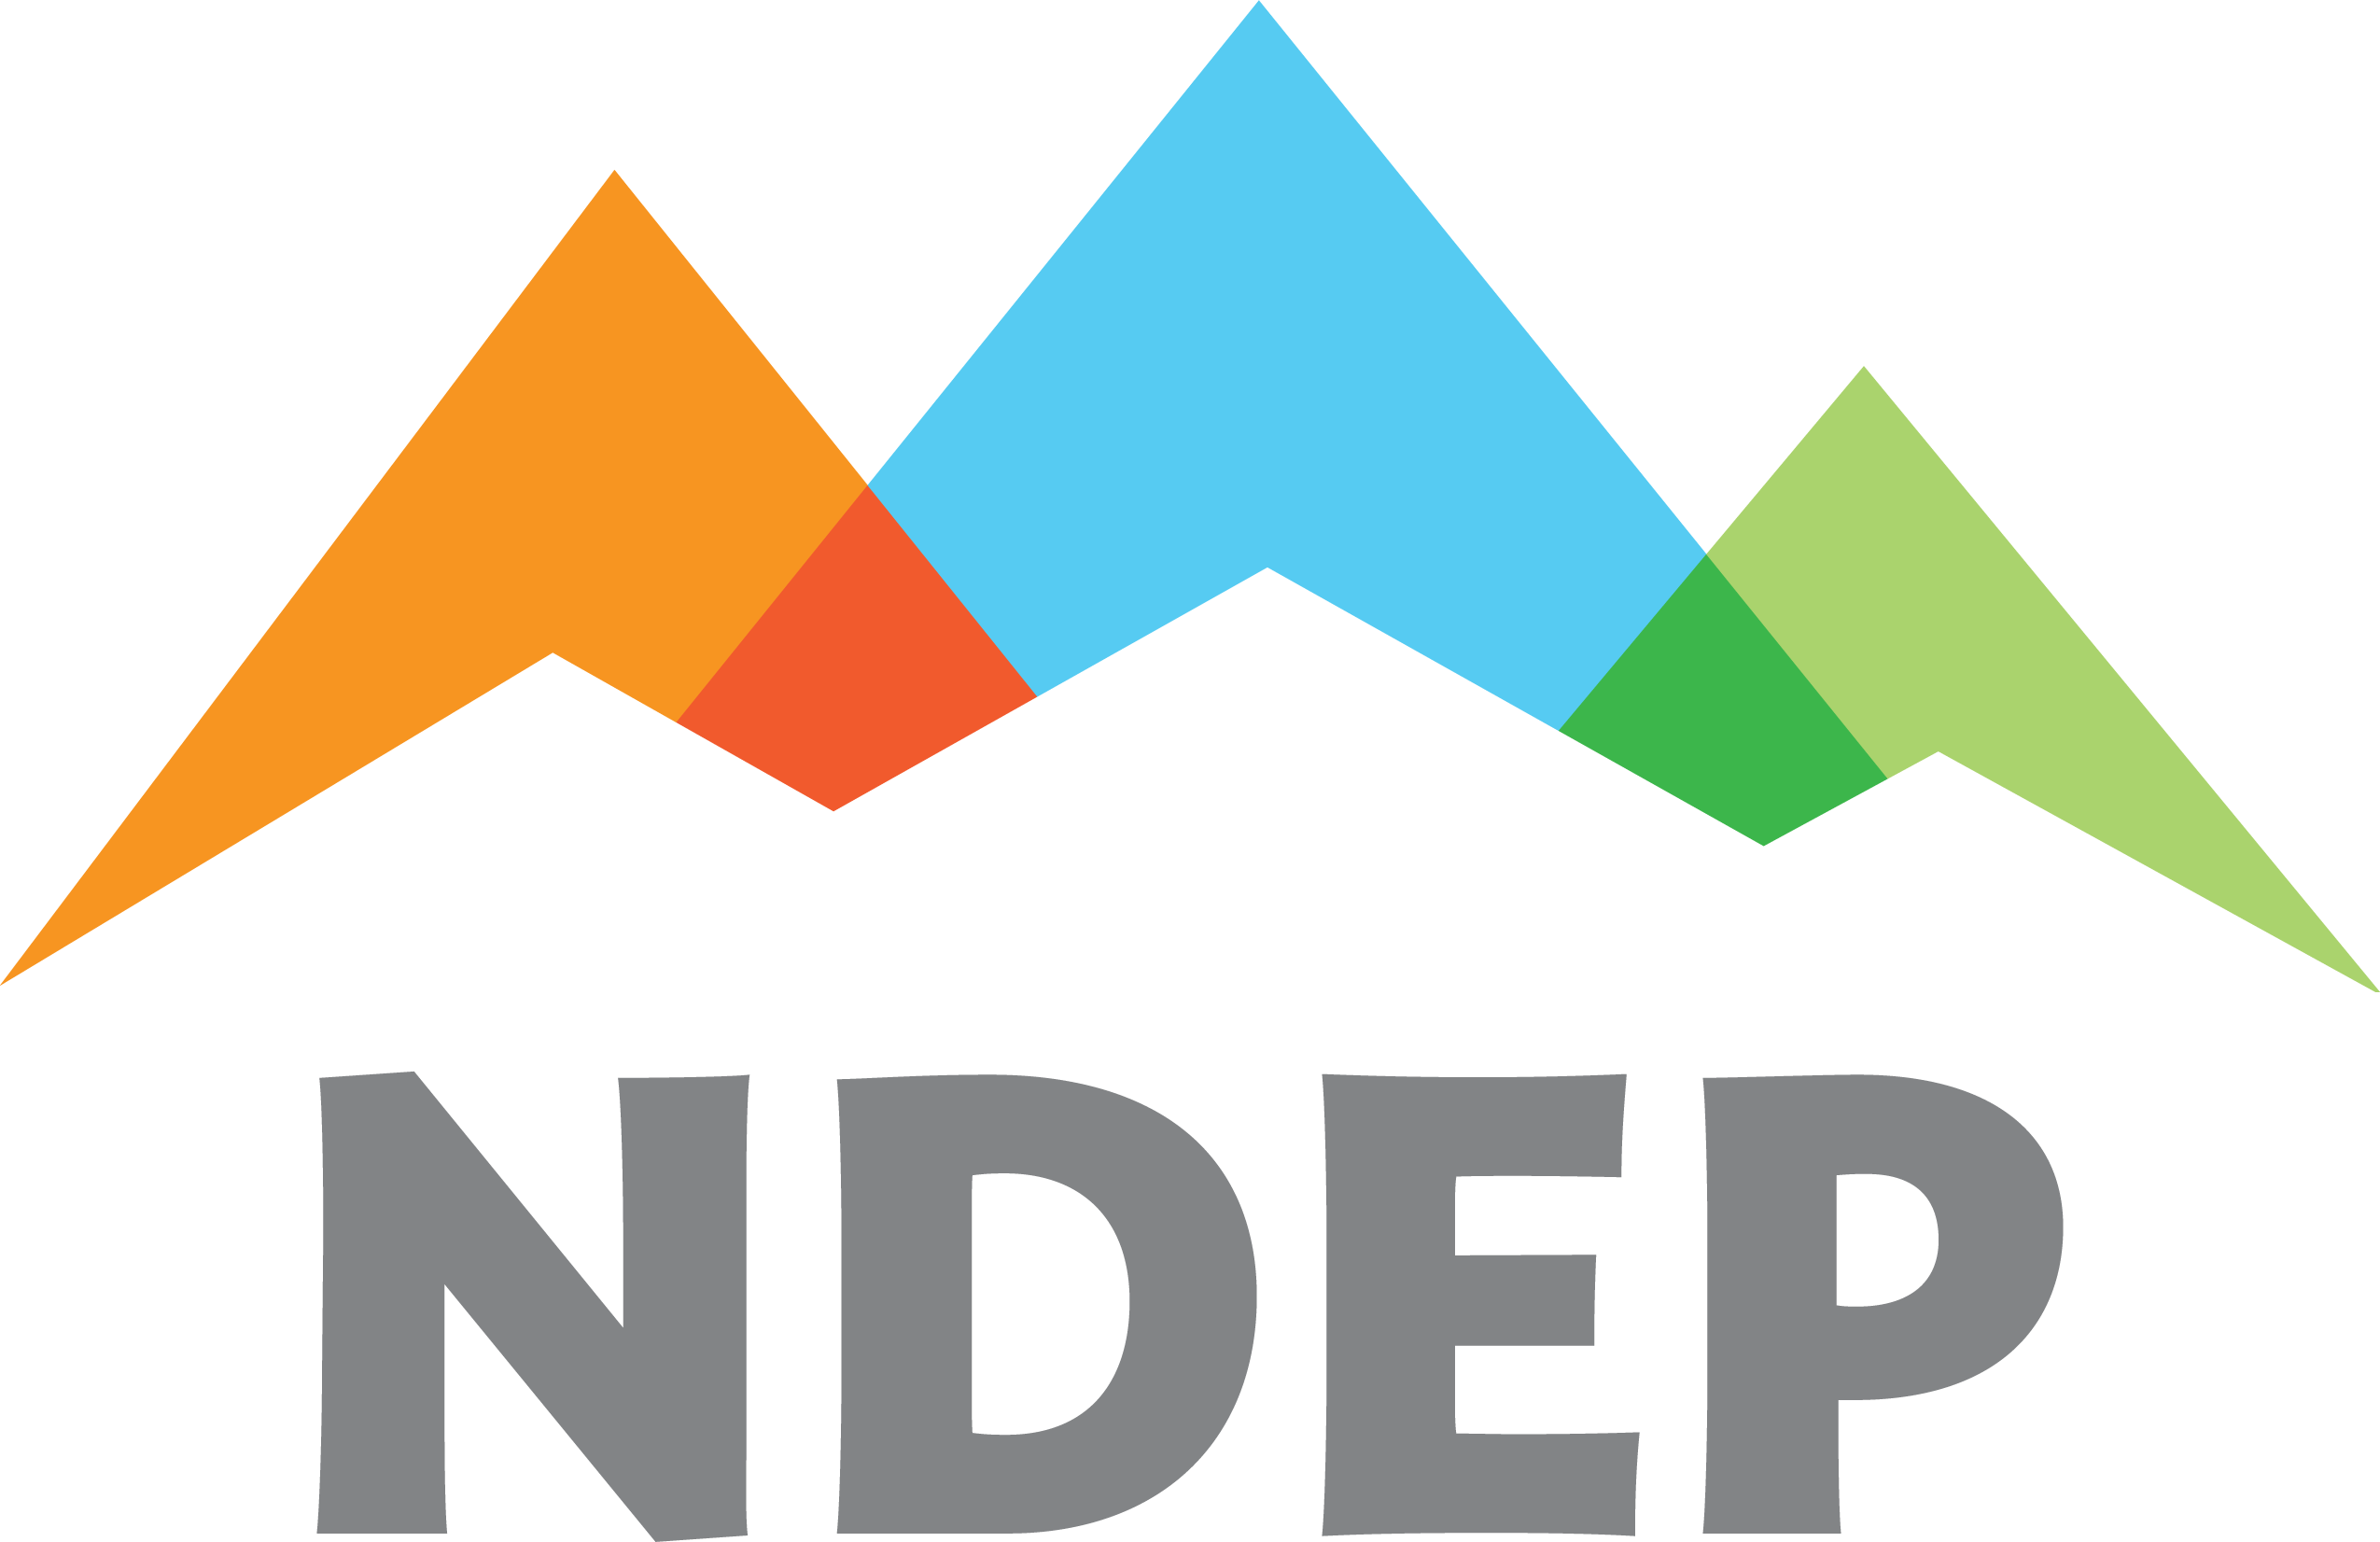 NDEP logo with 5 colors: orange, red, blue, dark green, and light green